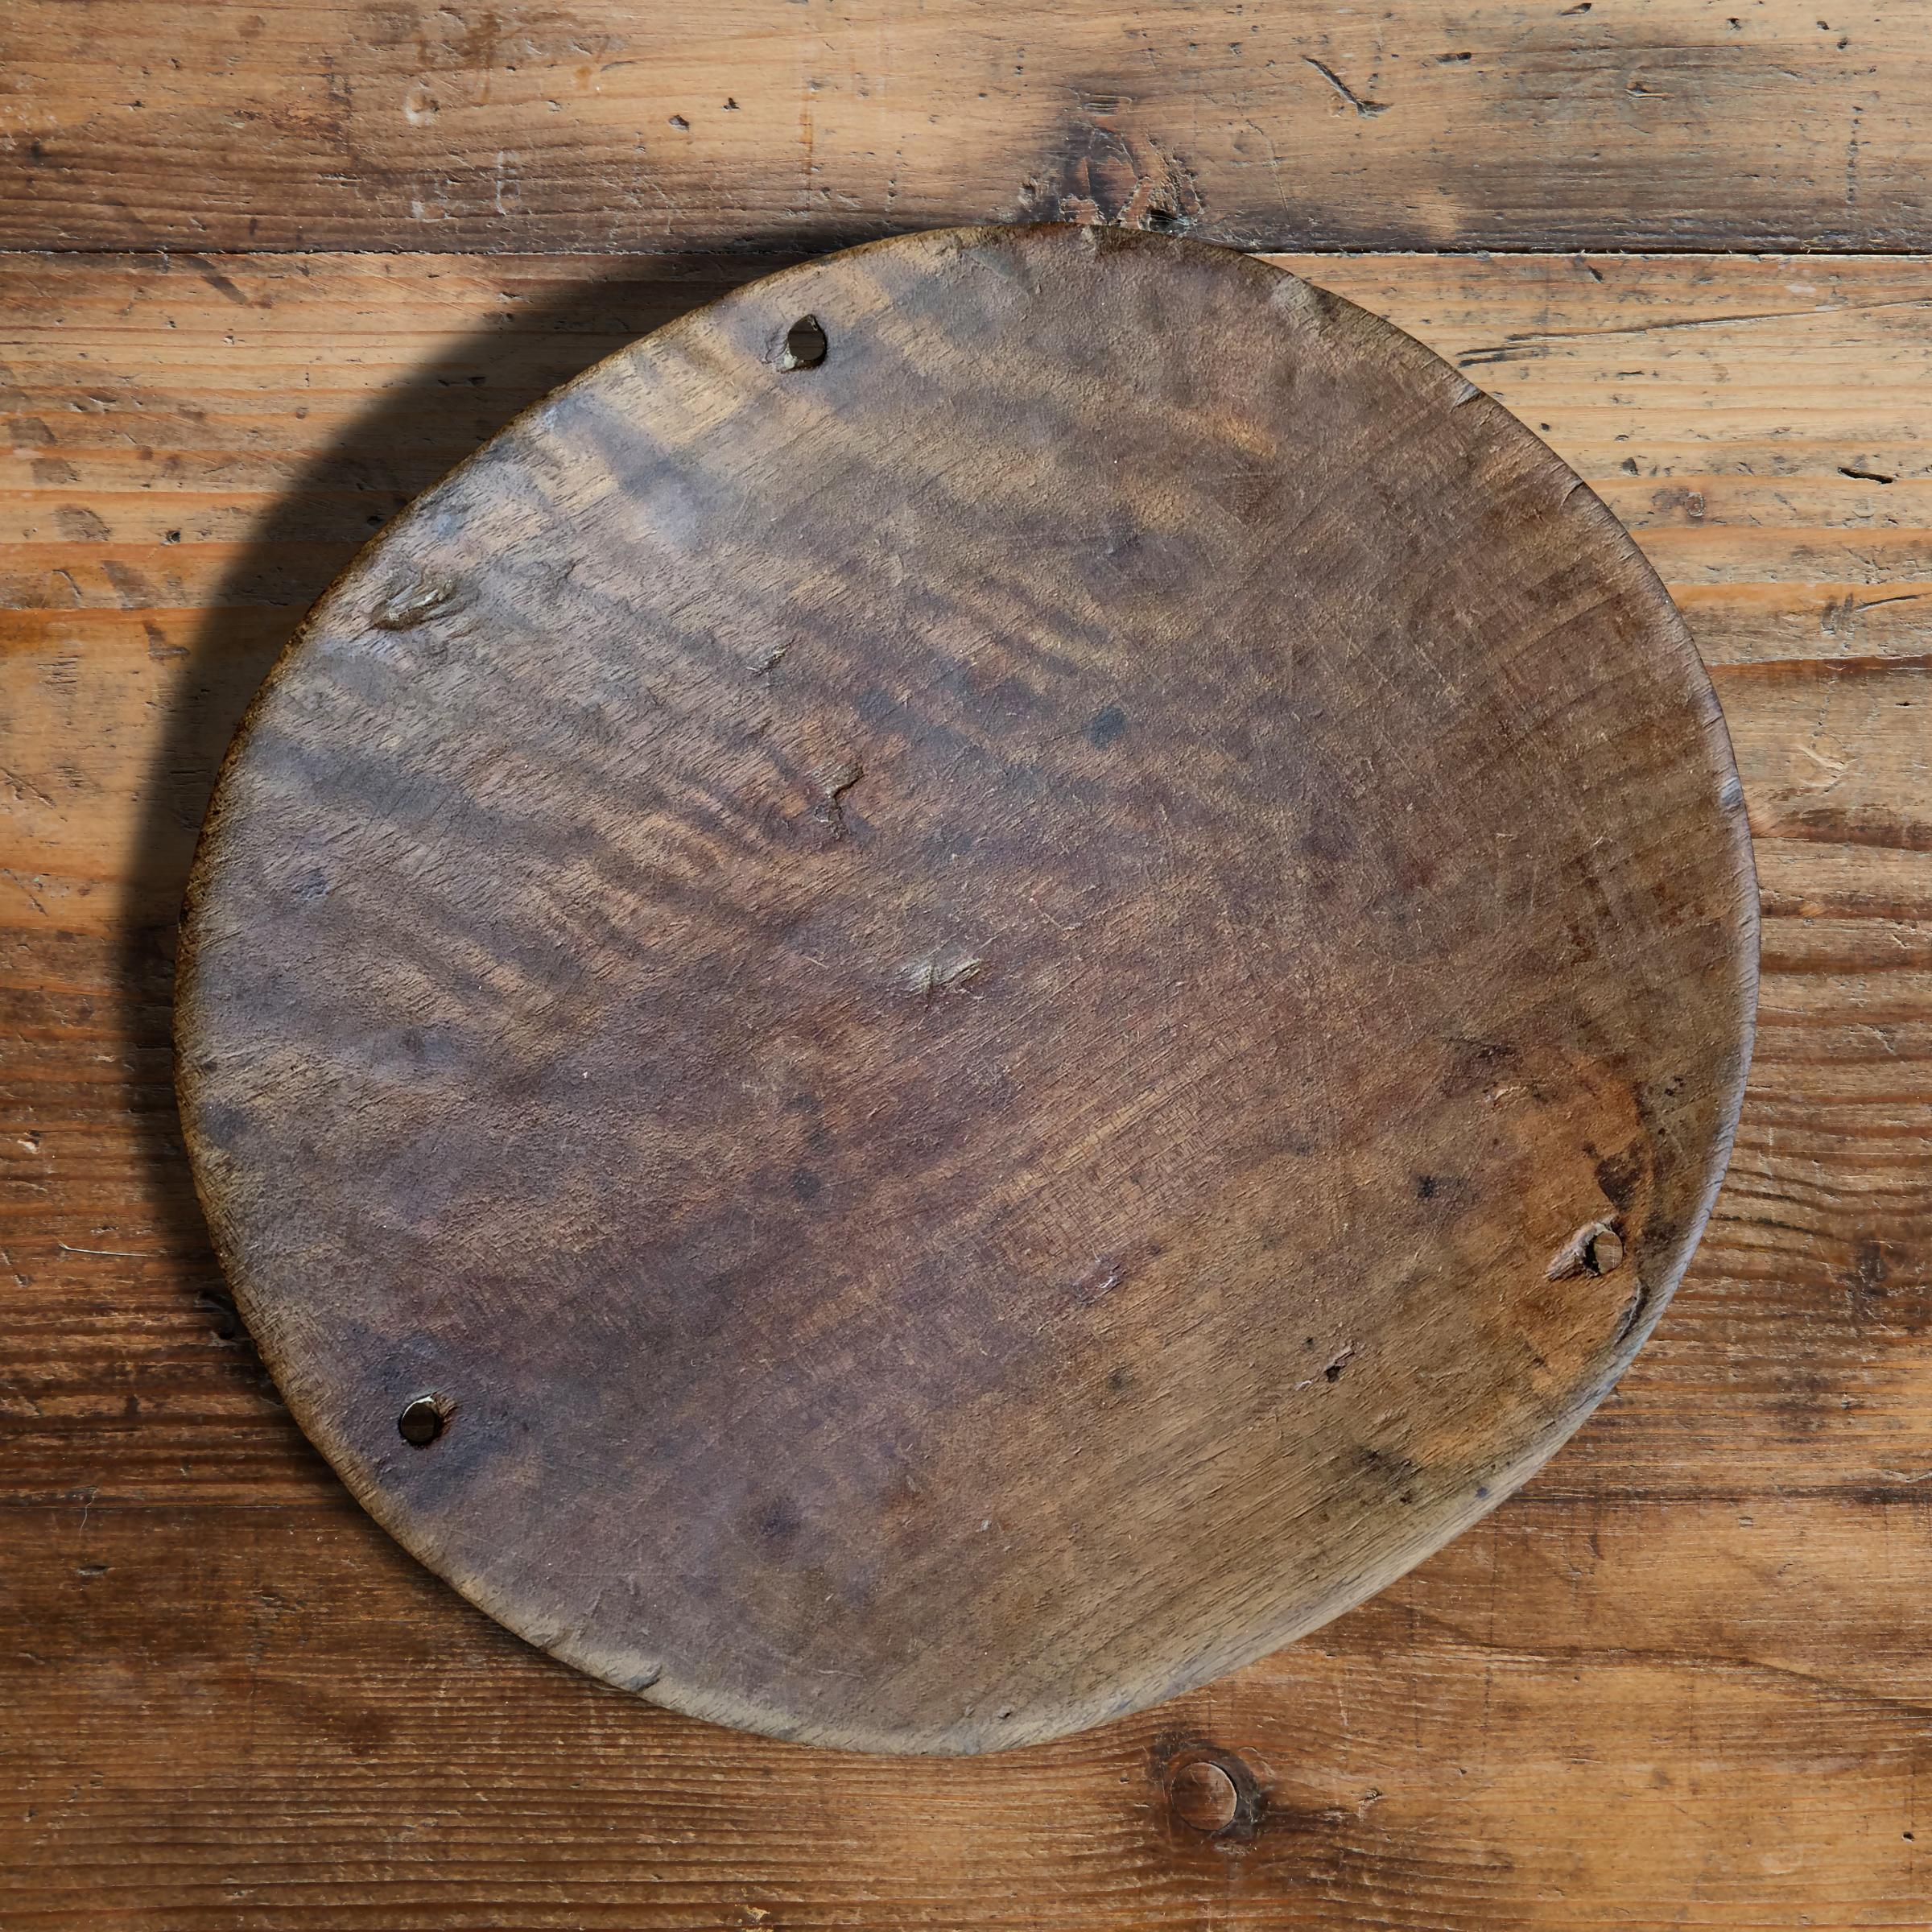 A fantastic 19th century Turkish burl wood bowl with a wonderful patina. Originally part of a scale where two of these bowls would have been used to weigh vegetables, spices, or other foodstuffs in a market, but now functions as a beautiful bowl to